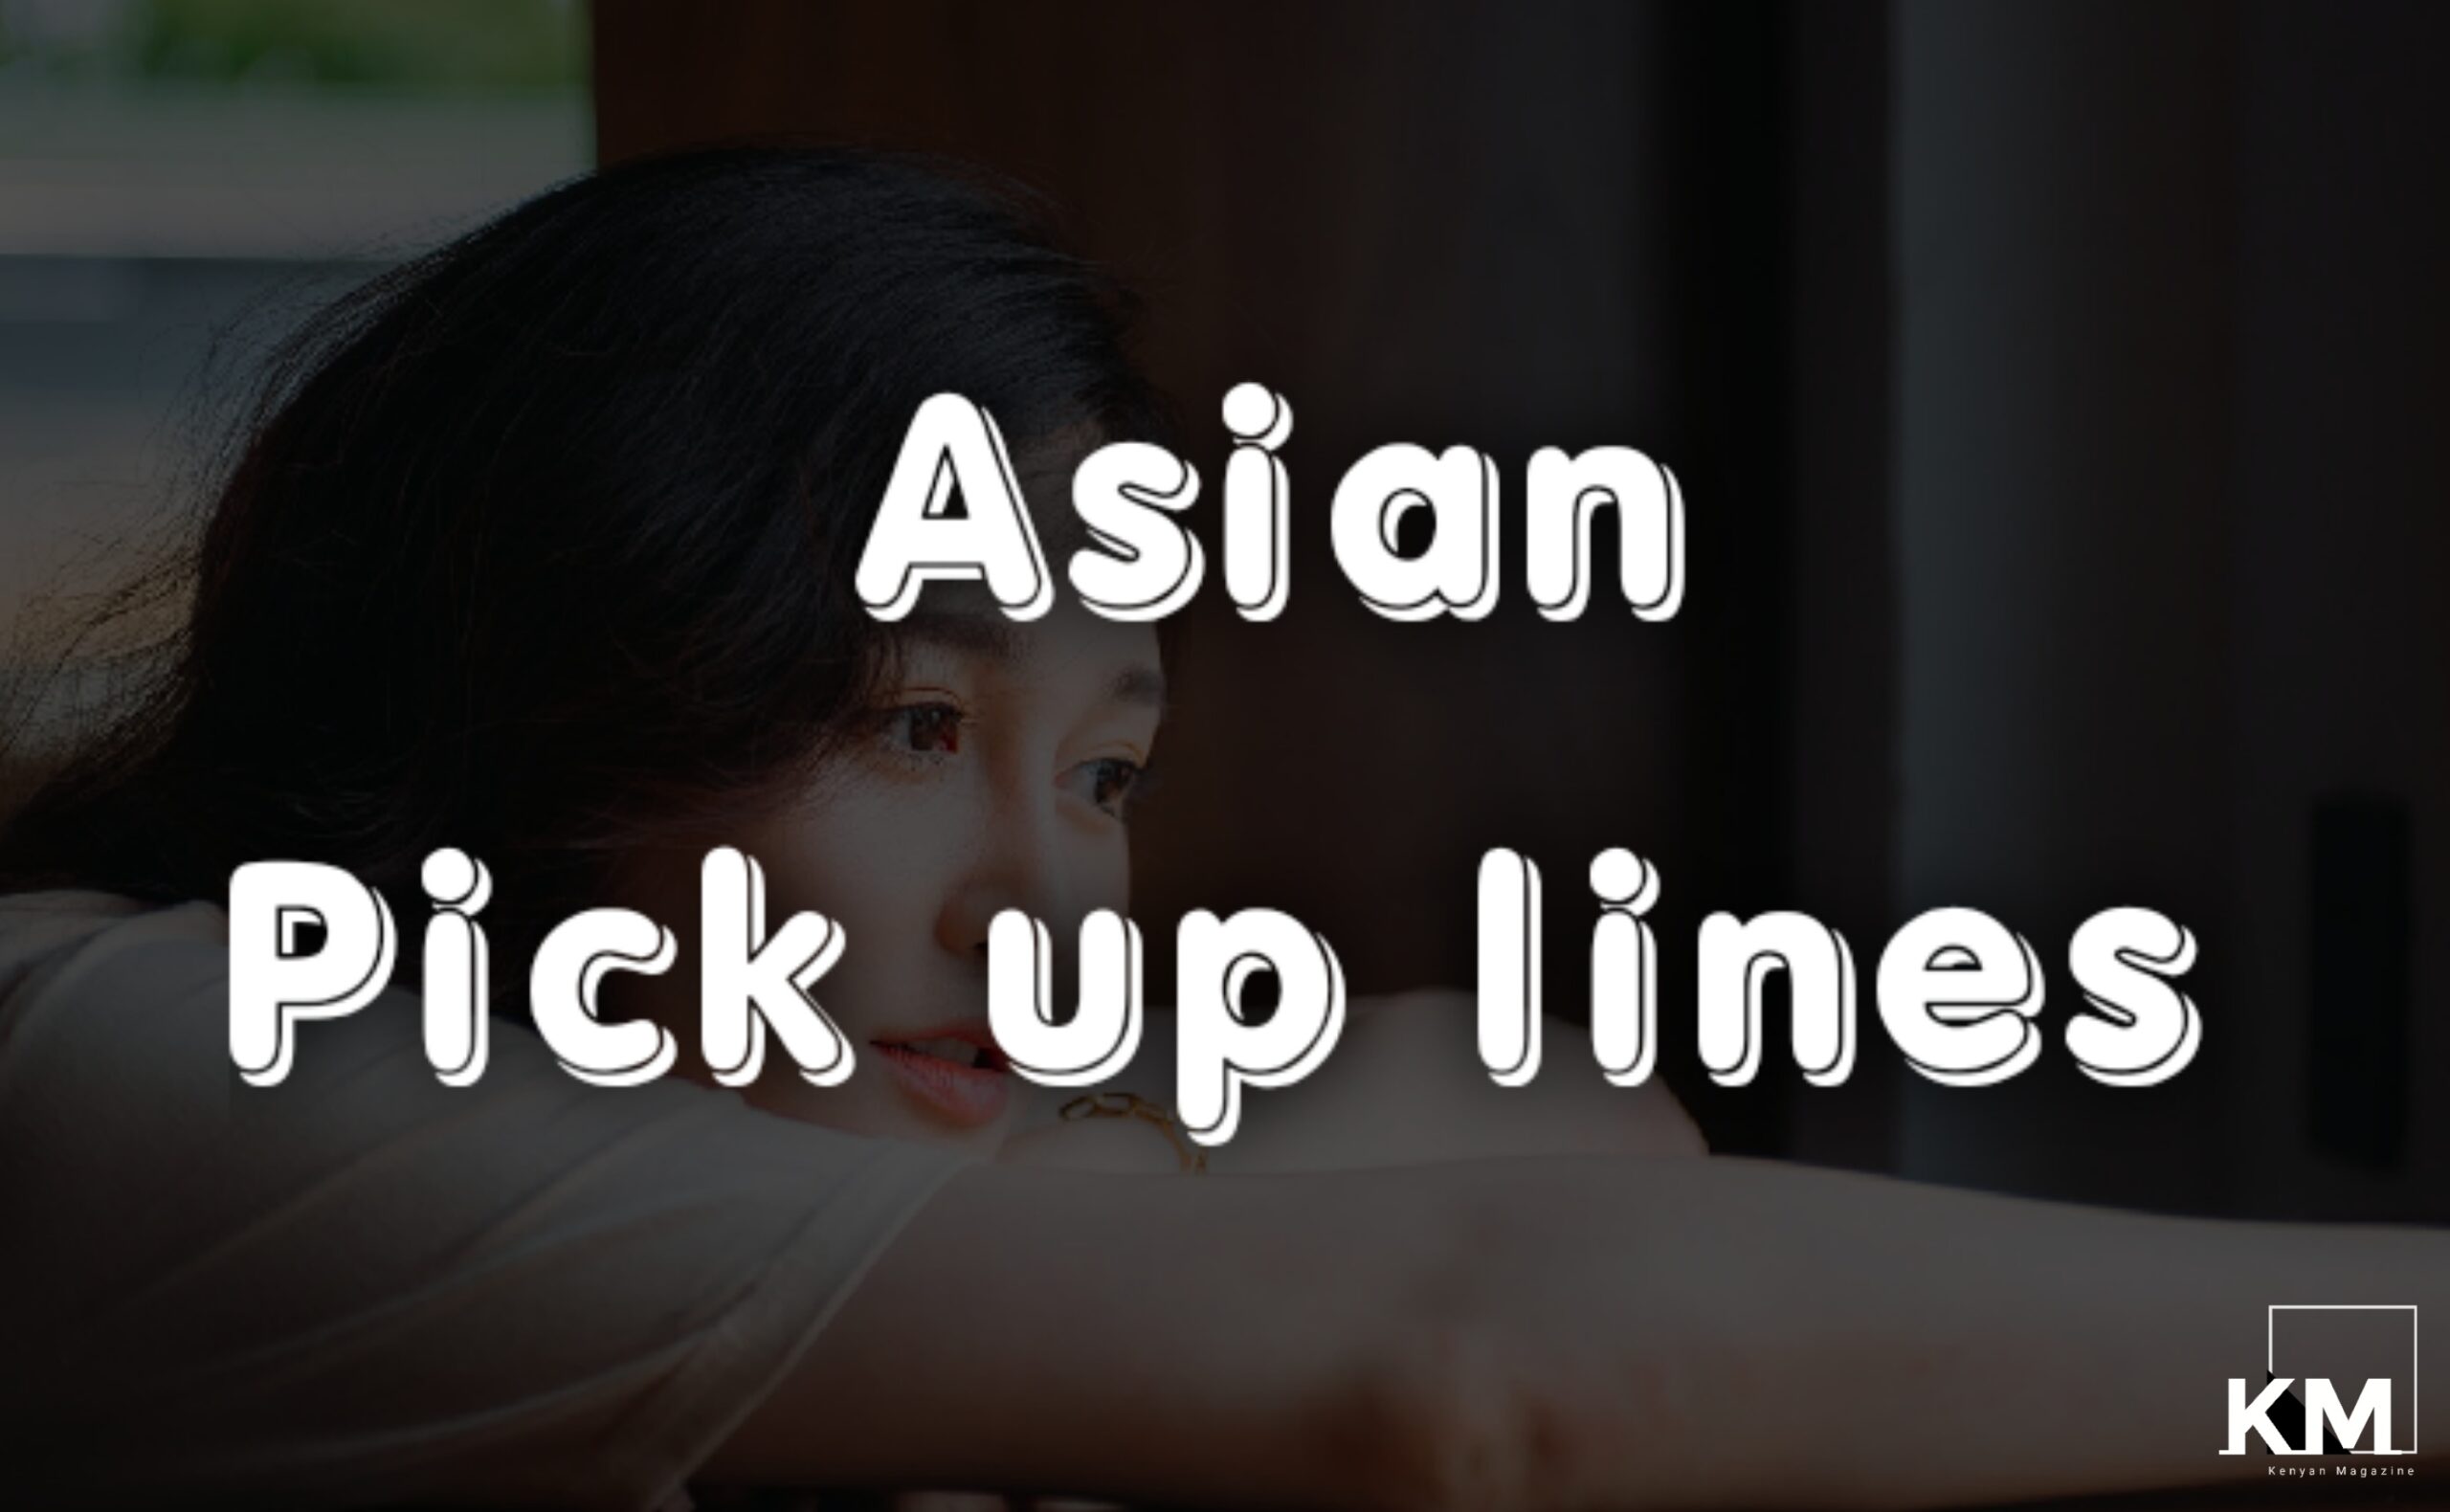 Asian pickup lines